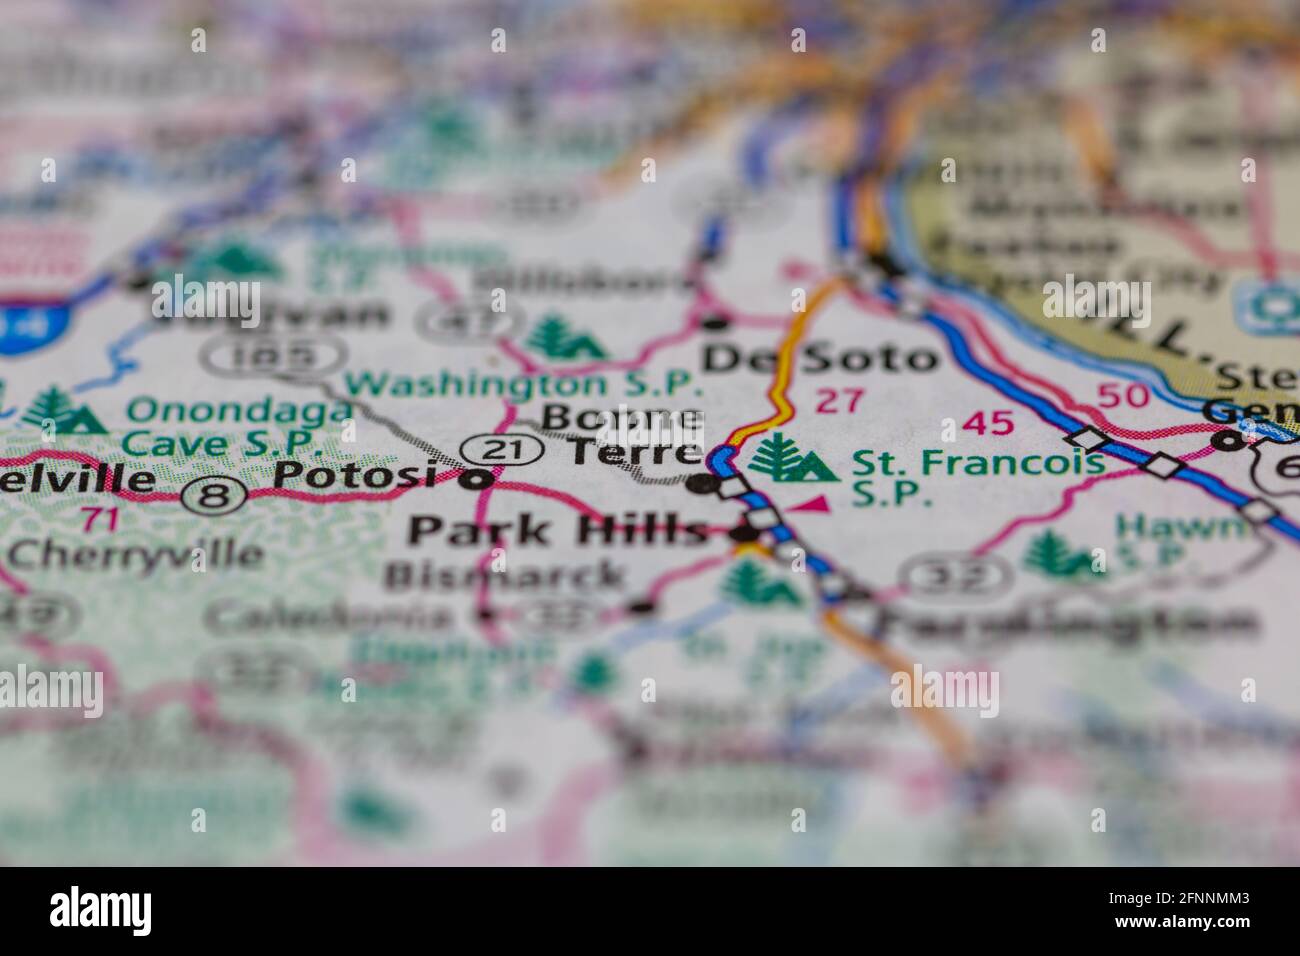 Bonne Terre Missouri Usa Shown On A Geography Map Or Road Map 2FNNMM3 